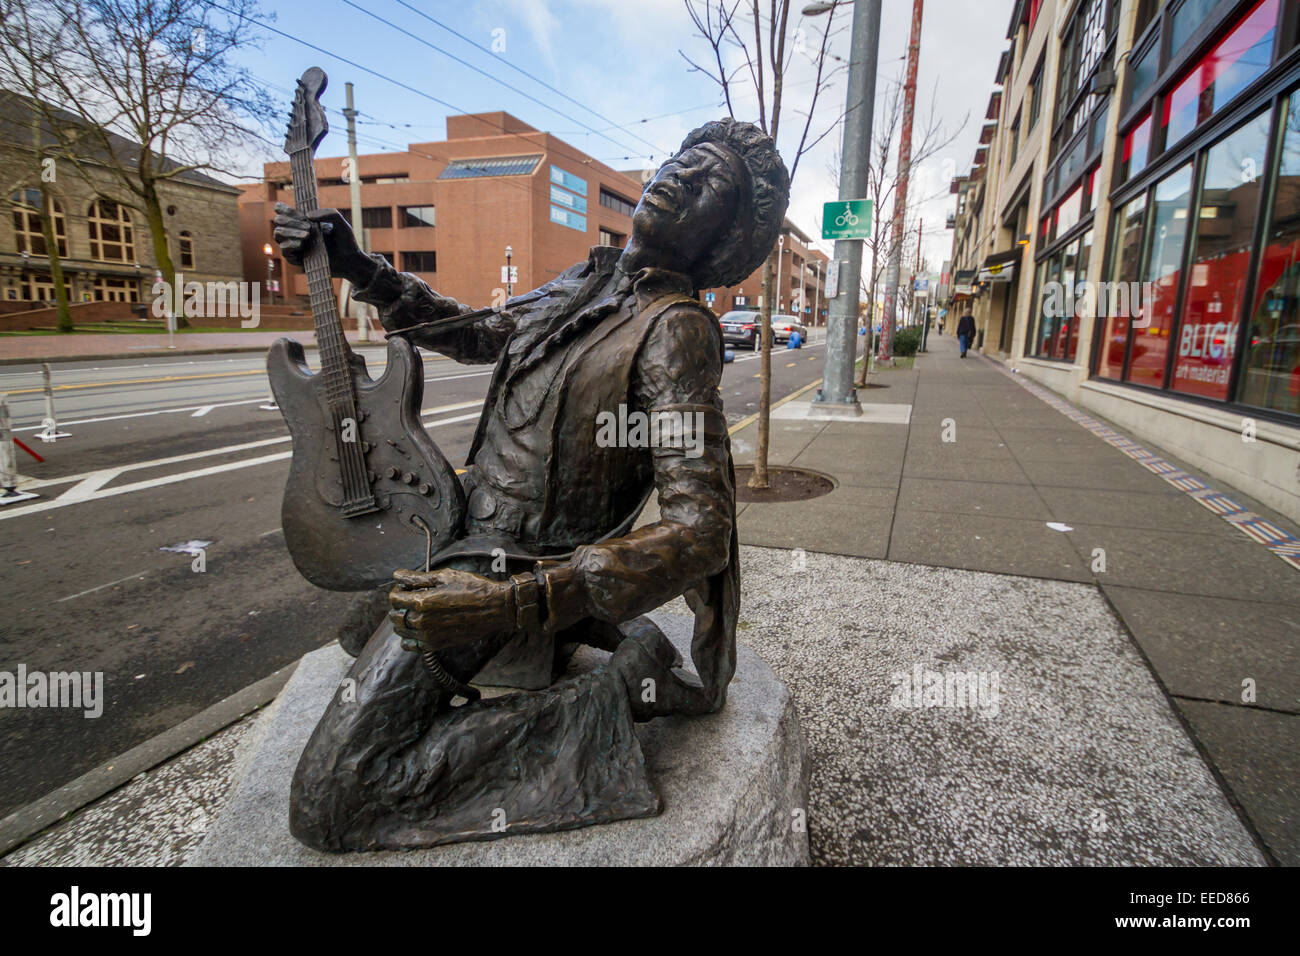 This statue is on Capitol Hill in Seattle, at the intersection of Broadway and Pine Street, and honors Jimi Hendrix. Stock Photo